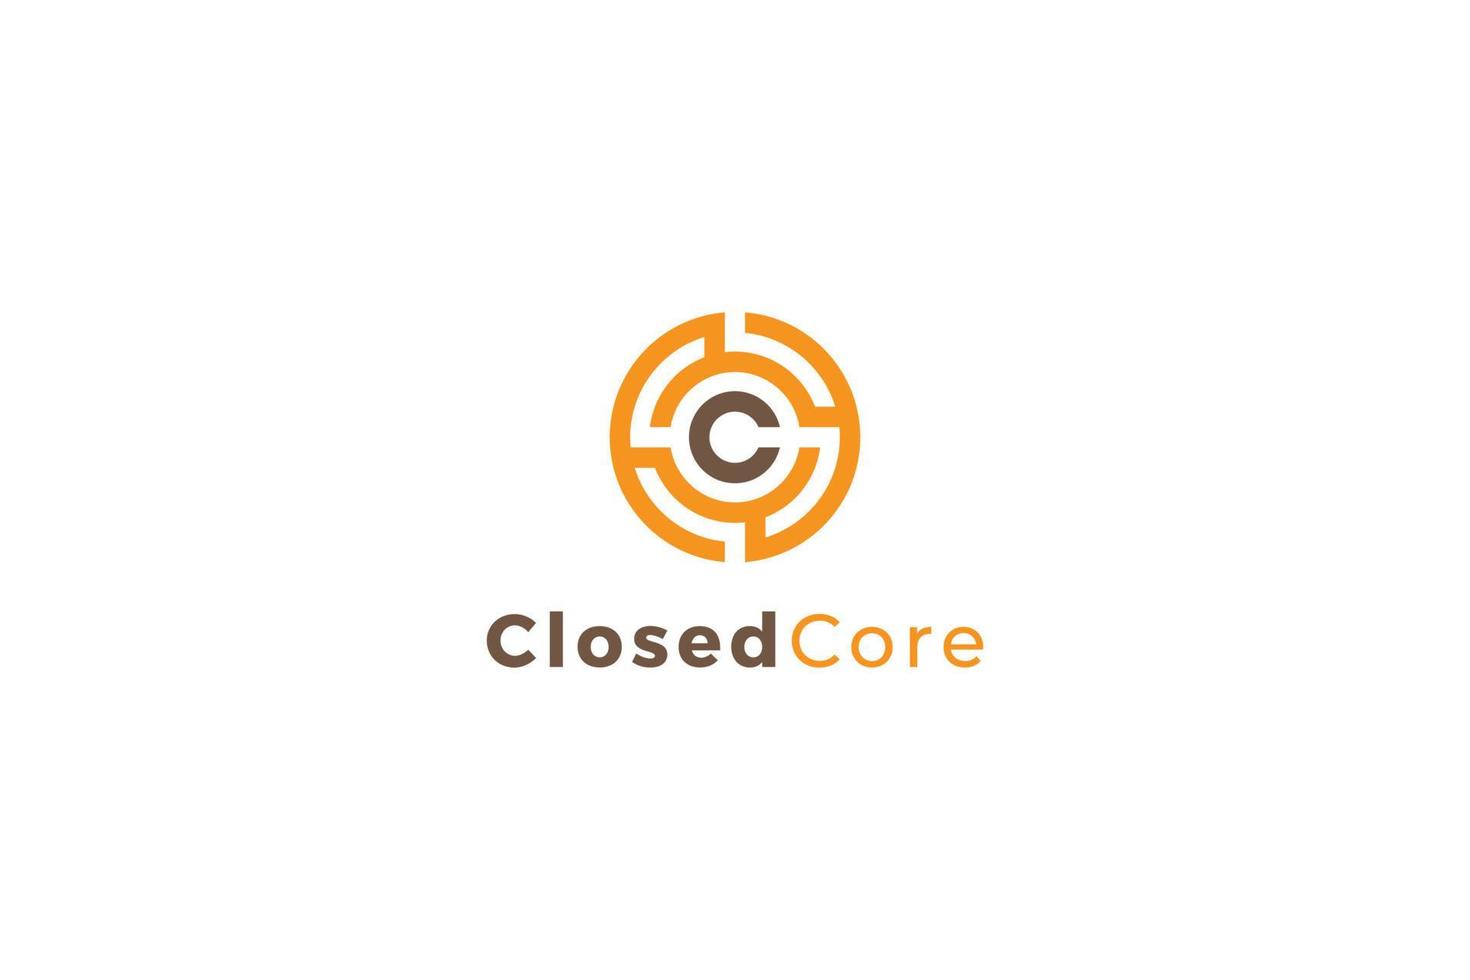 Letter c closed core abstract logo design vector